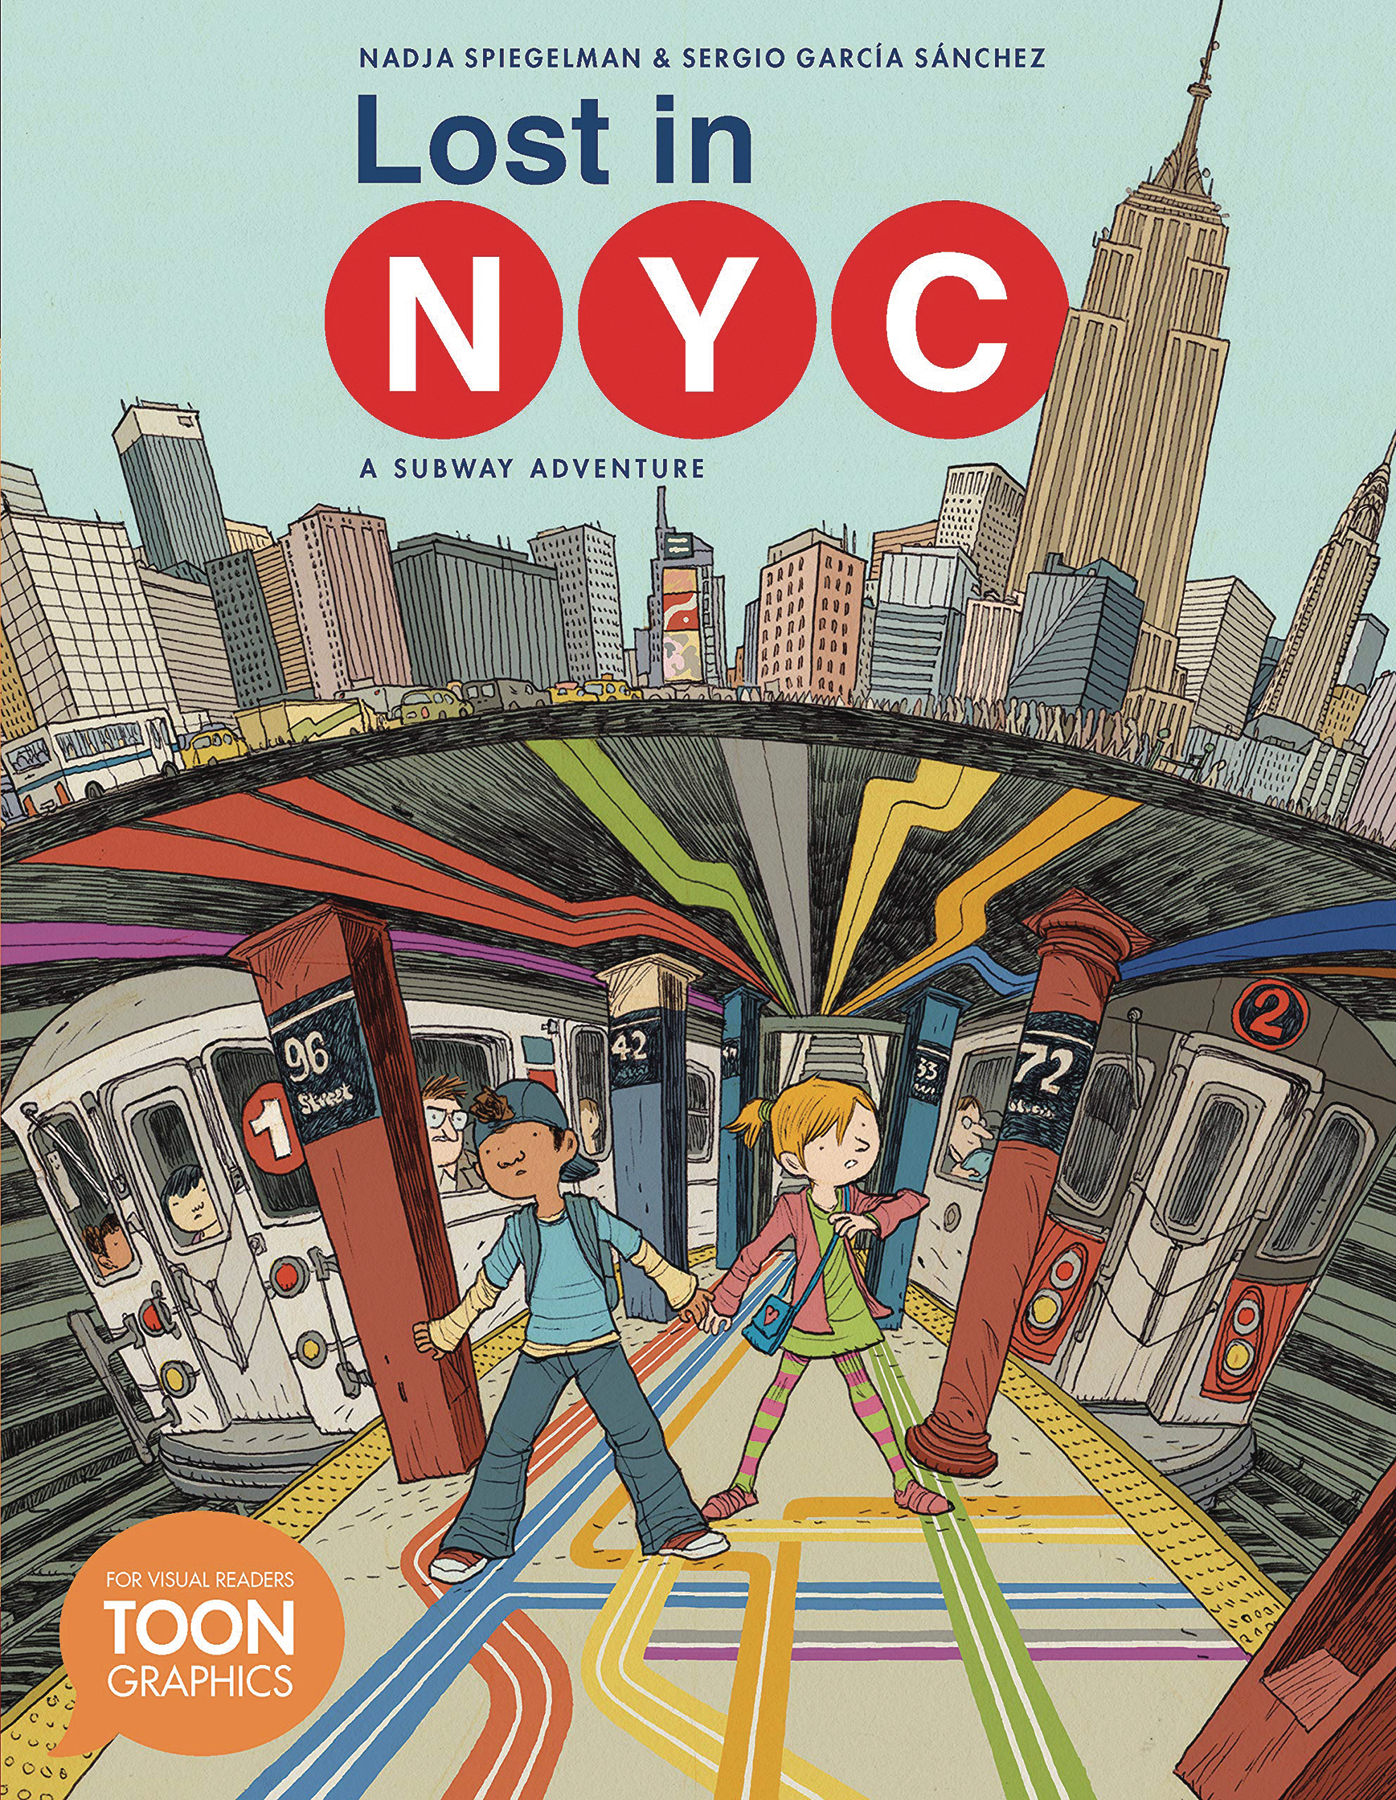 Lost In NYC Subway Adventure Soft Cover